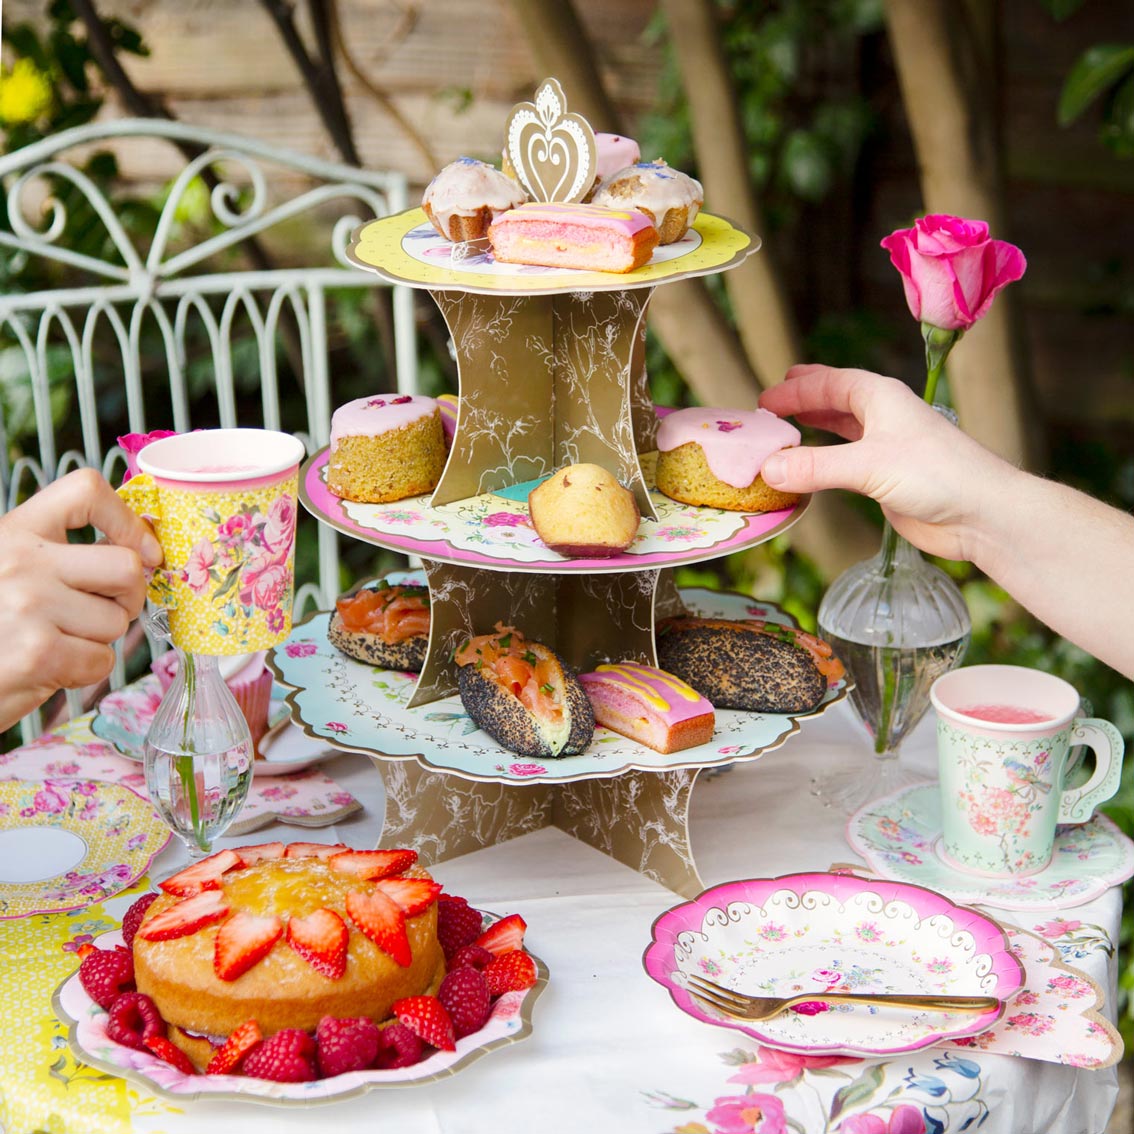 Truly Scrumptious 3 Tier Cake Stands Party tableware